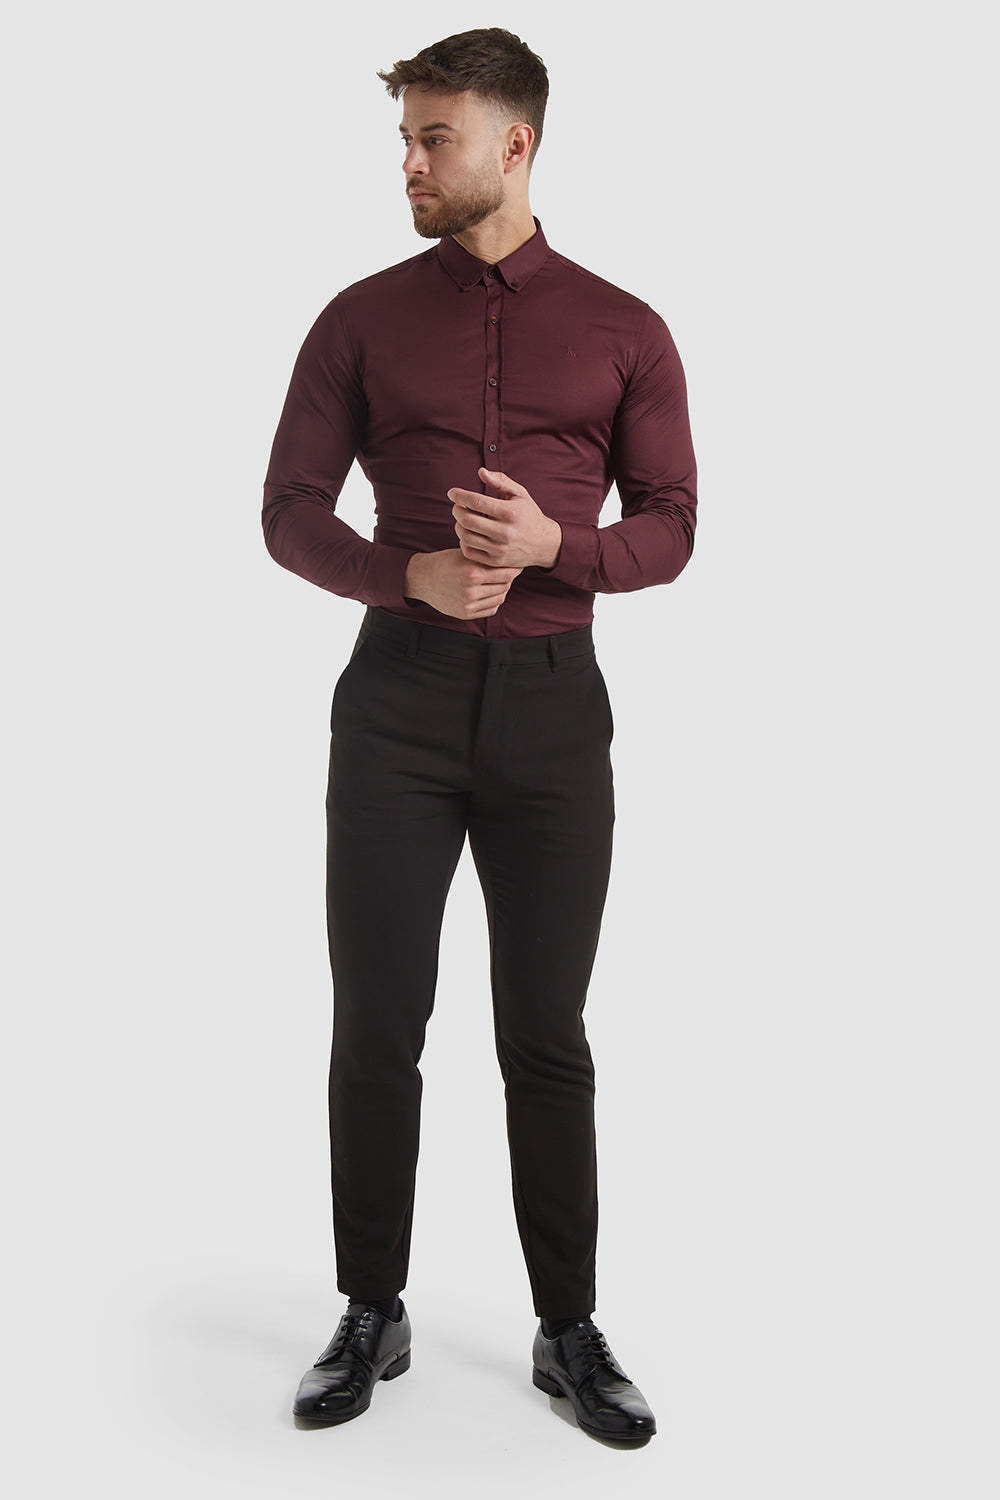 How Pants Should Fit - Find the Perfect Fit - TAILORED ATHLETE - USA